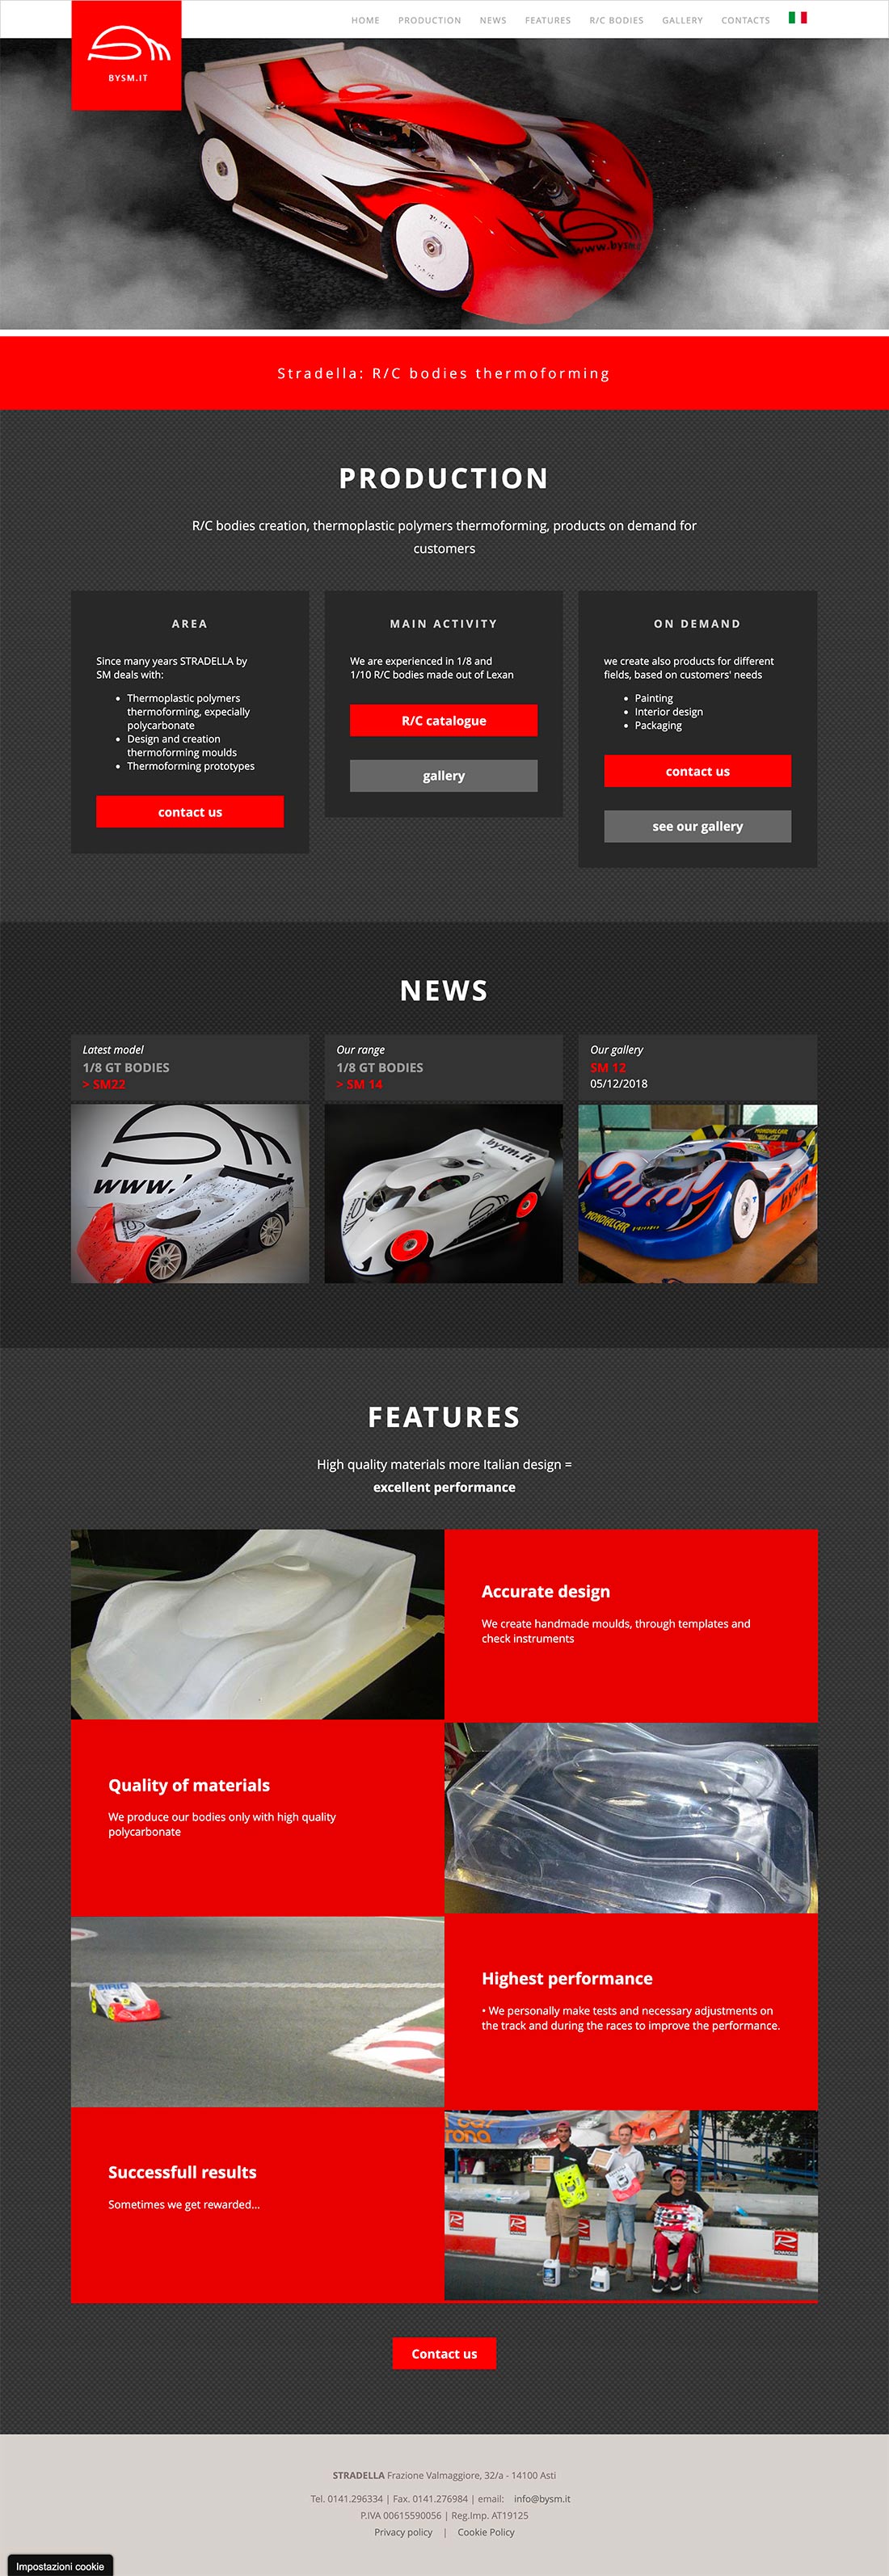 Omarv Italy's responsive website, R/C bodies thermoforming